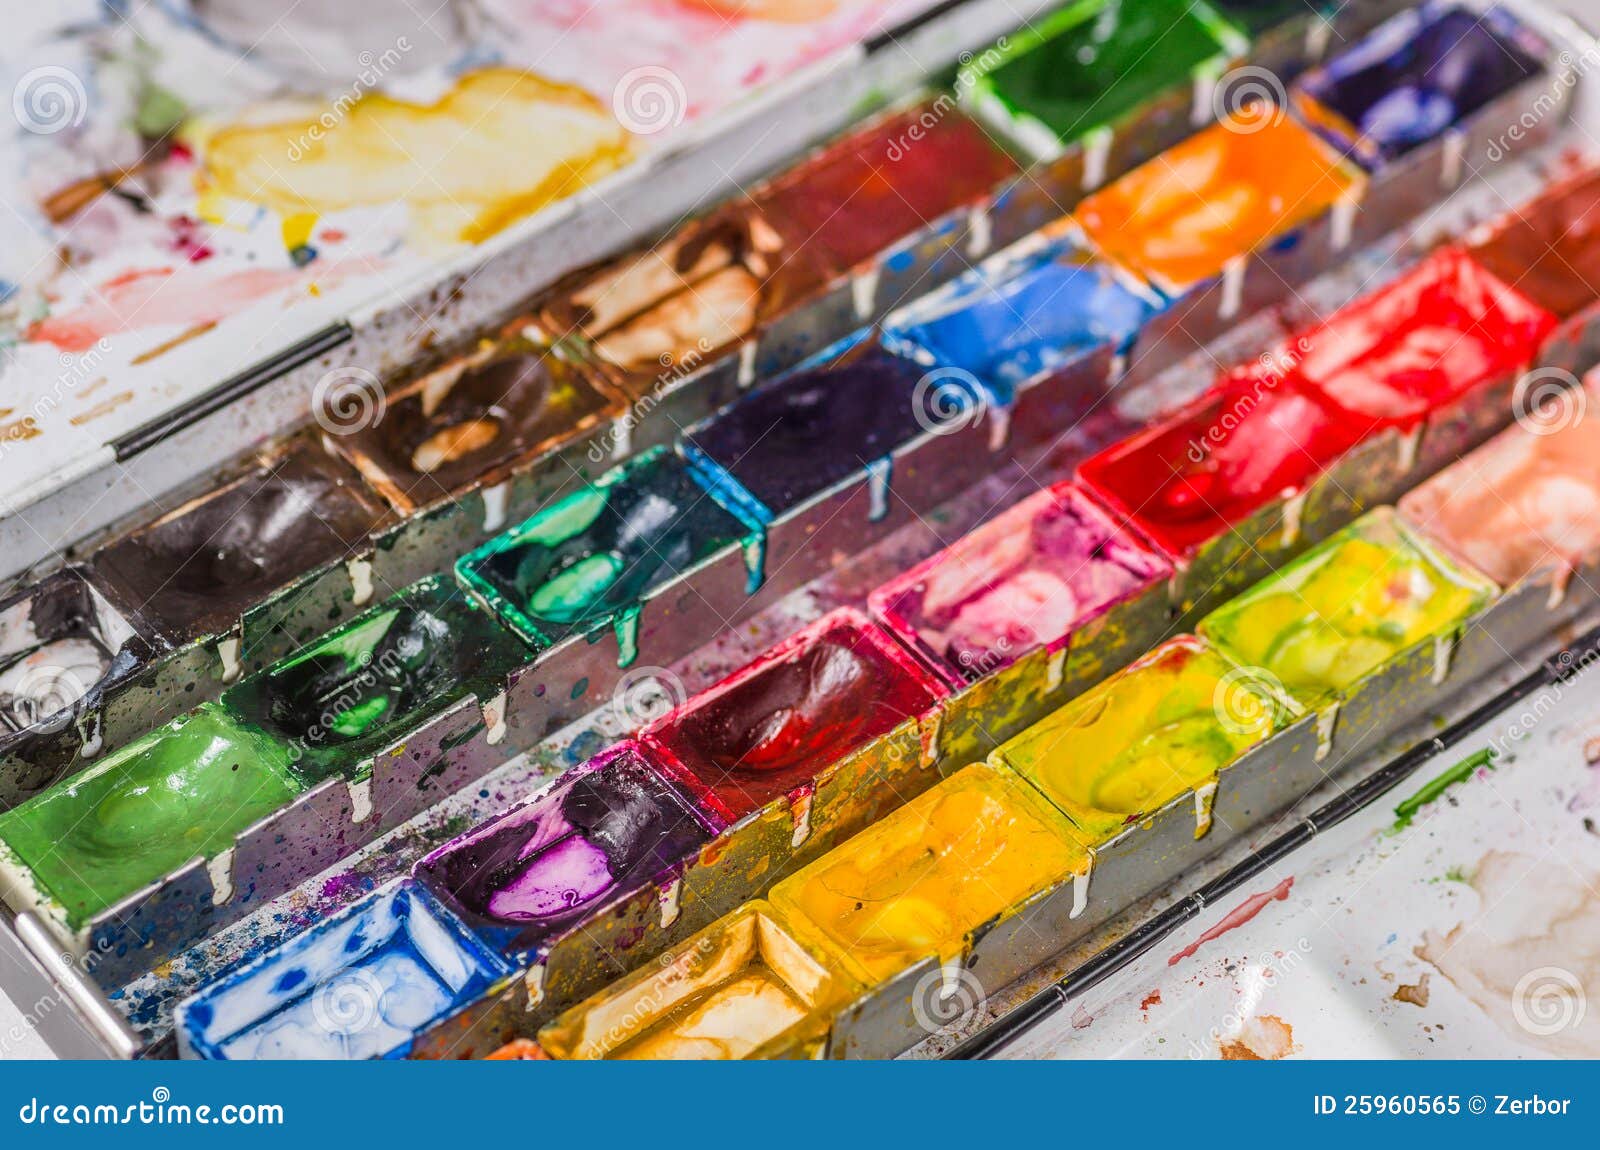 120+ Thousand Color Paint Box Royalty-Free Images, Stock Photos & Pictures